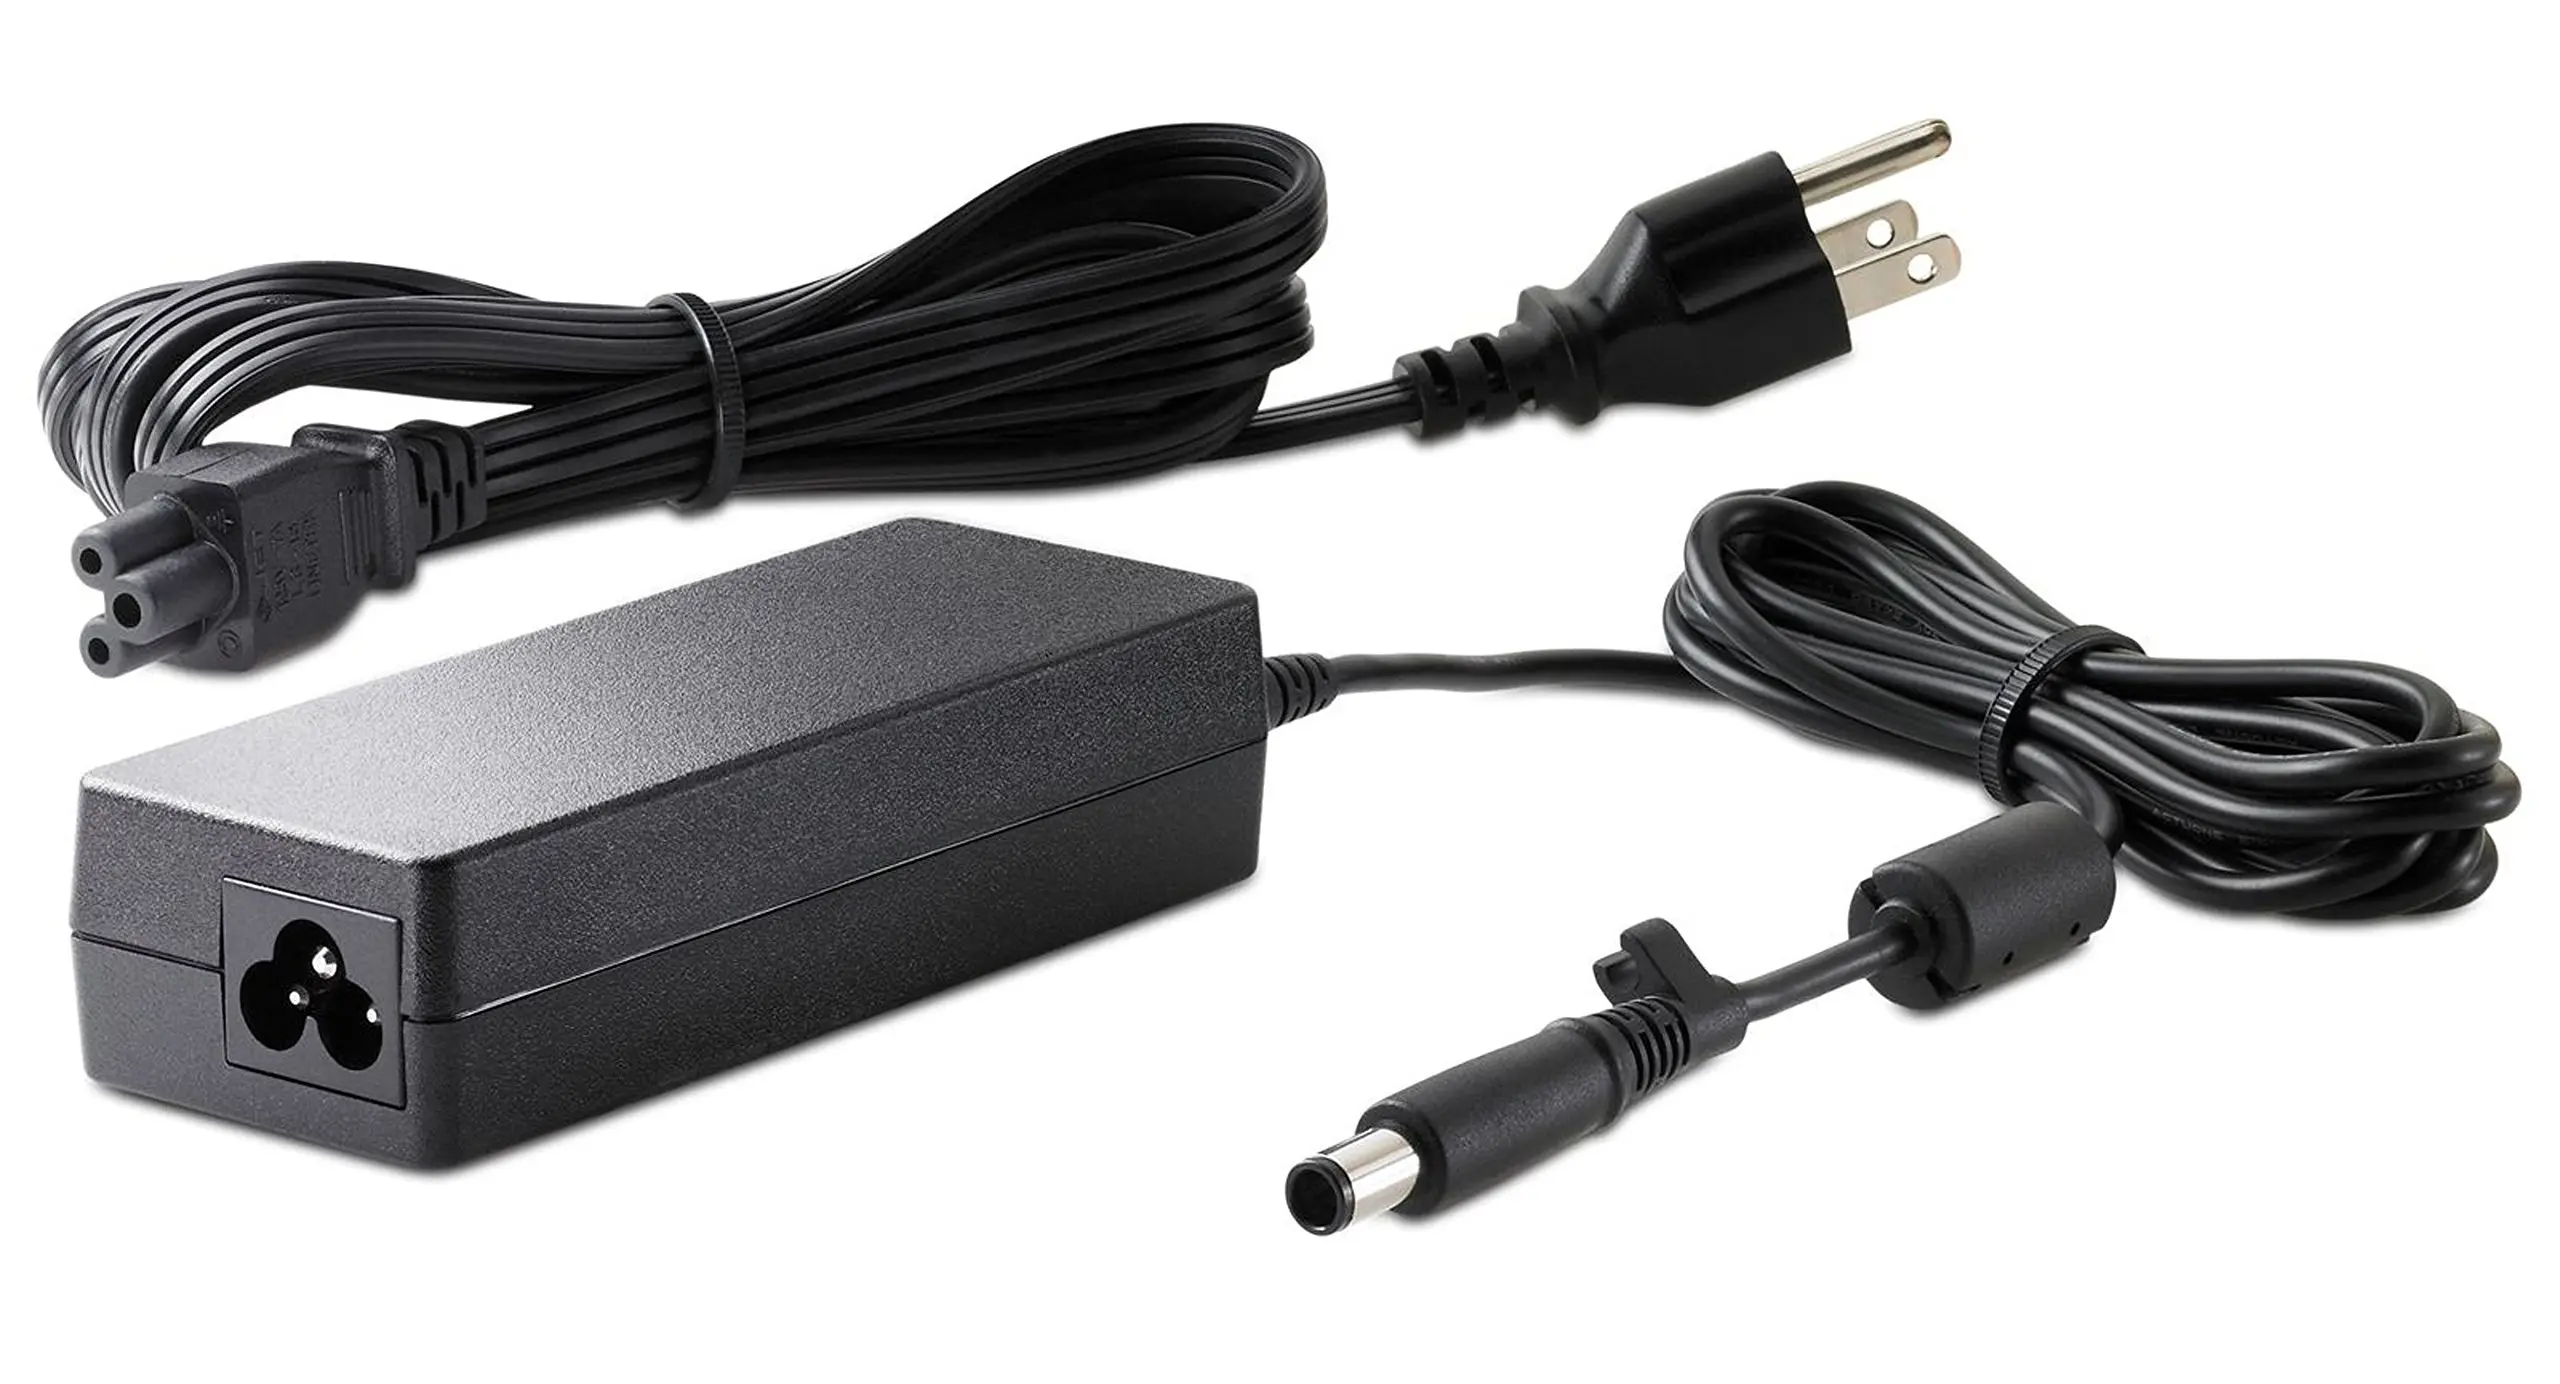 power cord for hewlett packard desktop computer - What is the name of the power cable for desktop computers